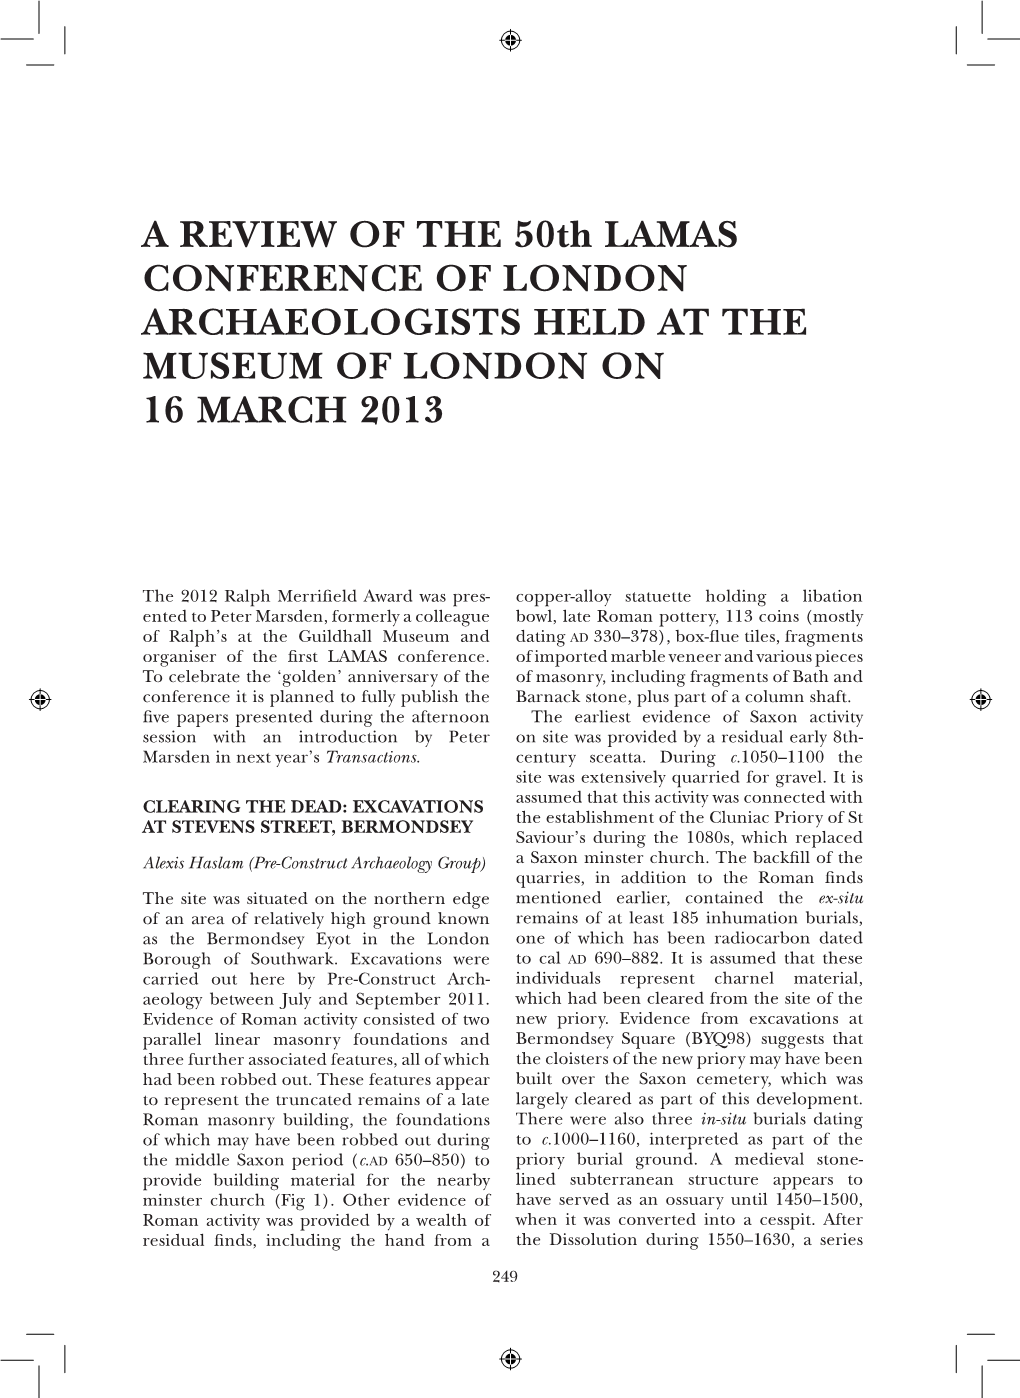 A REVIEW of the 50Th LAMAS CONFERENCE of LONDON ARCHAEOLOGISTS HELD at the MUSEUM of LONDON on 16 MARCH 2013